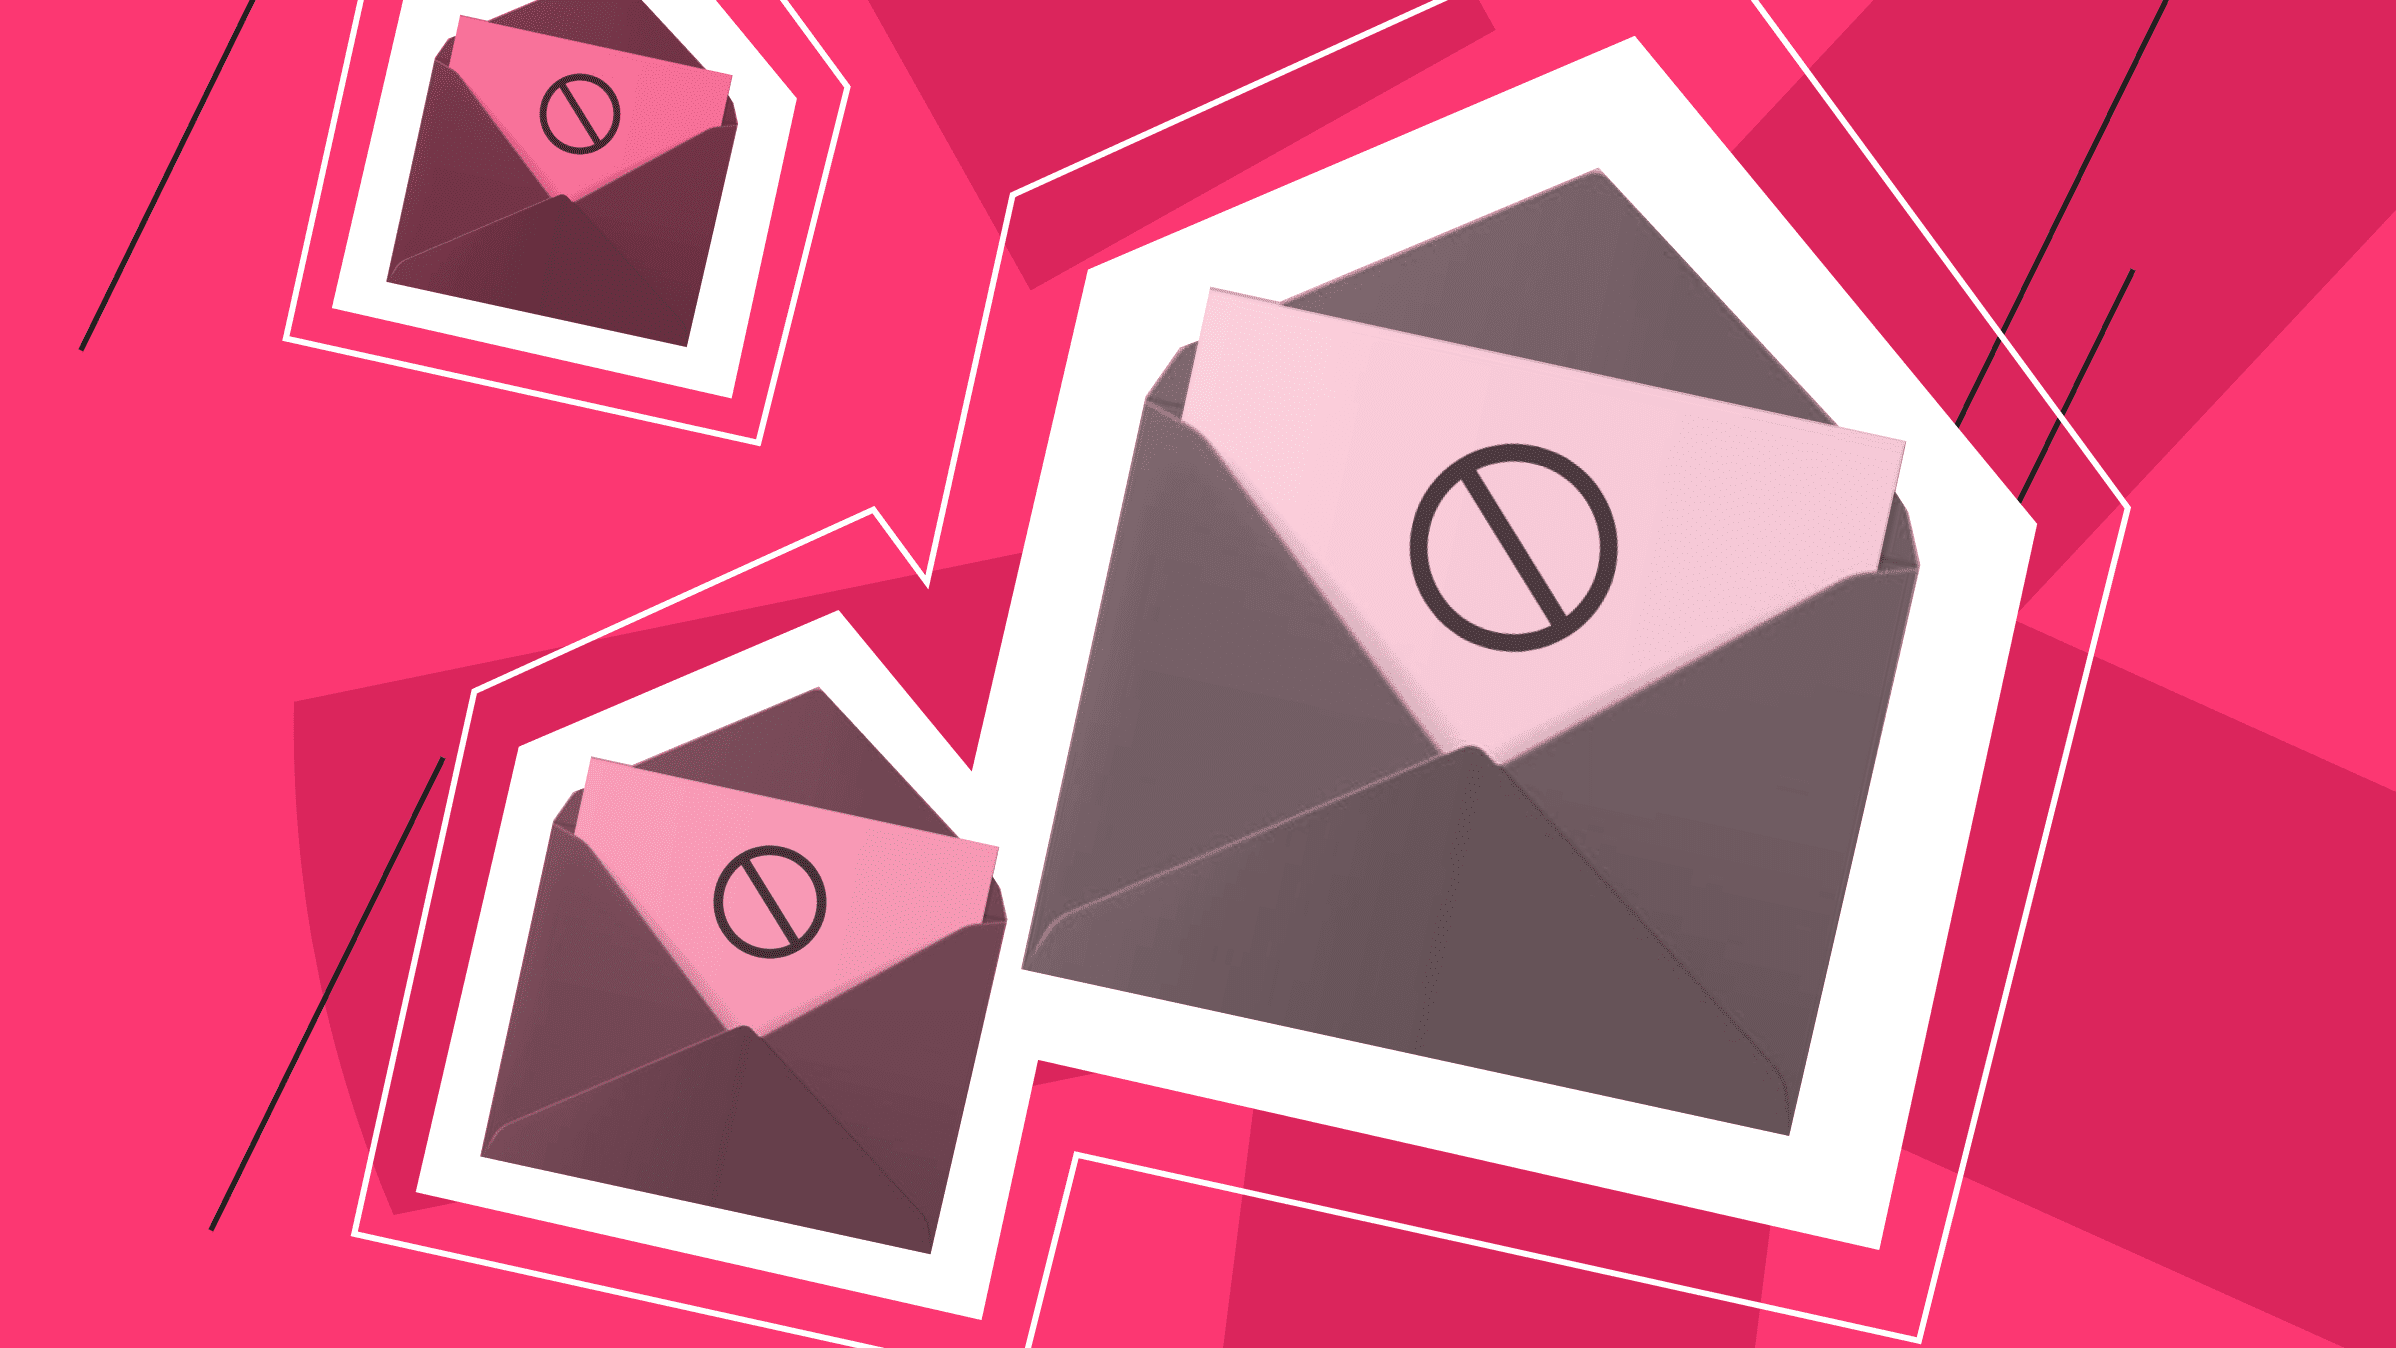 How to deliver emails and avoid blacklists: features of an SMTP server